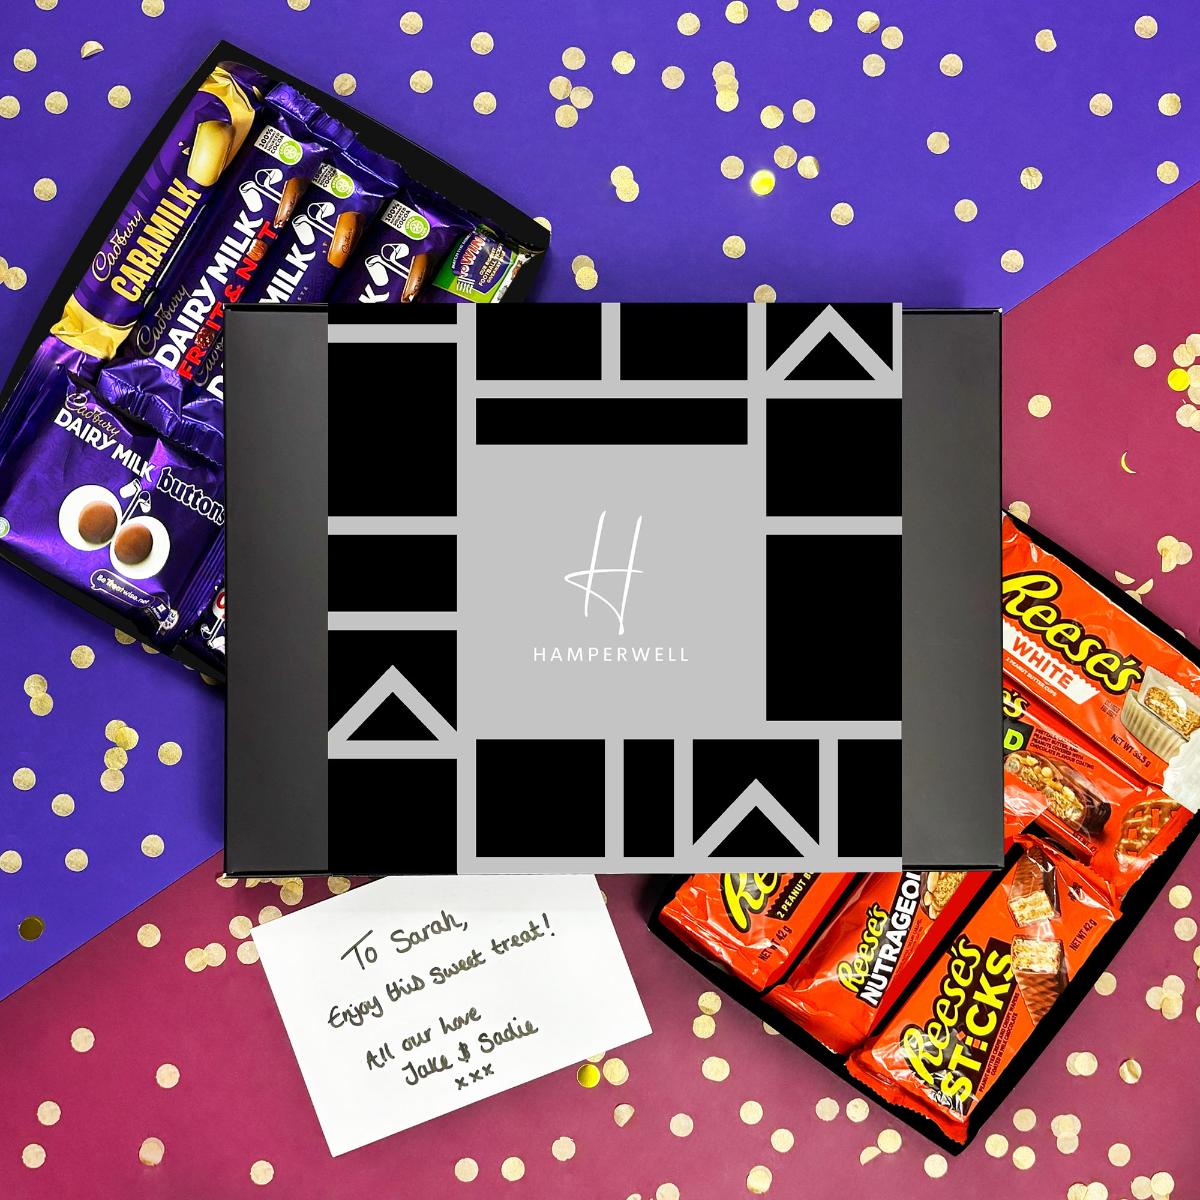 Reese’s Chocolate XL Mix & Match Letterbox Friendly Gift Hamper